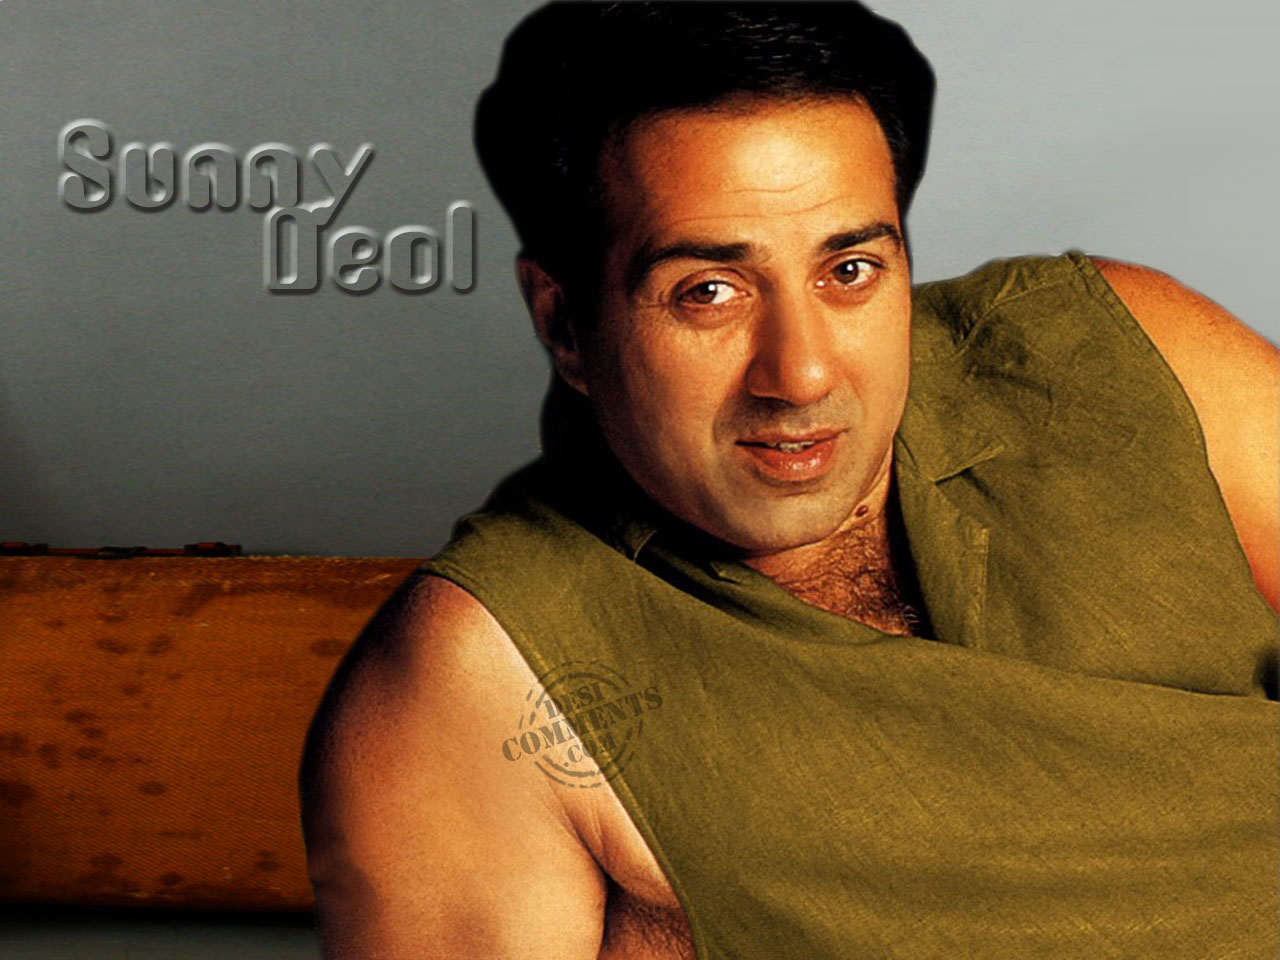 sunny deol wallpaper,forehead,chin,arm,muscle,cheek